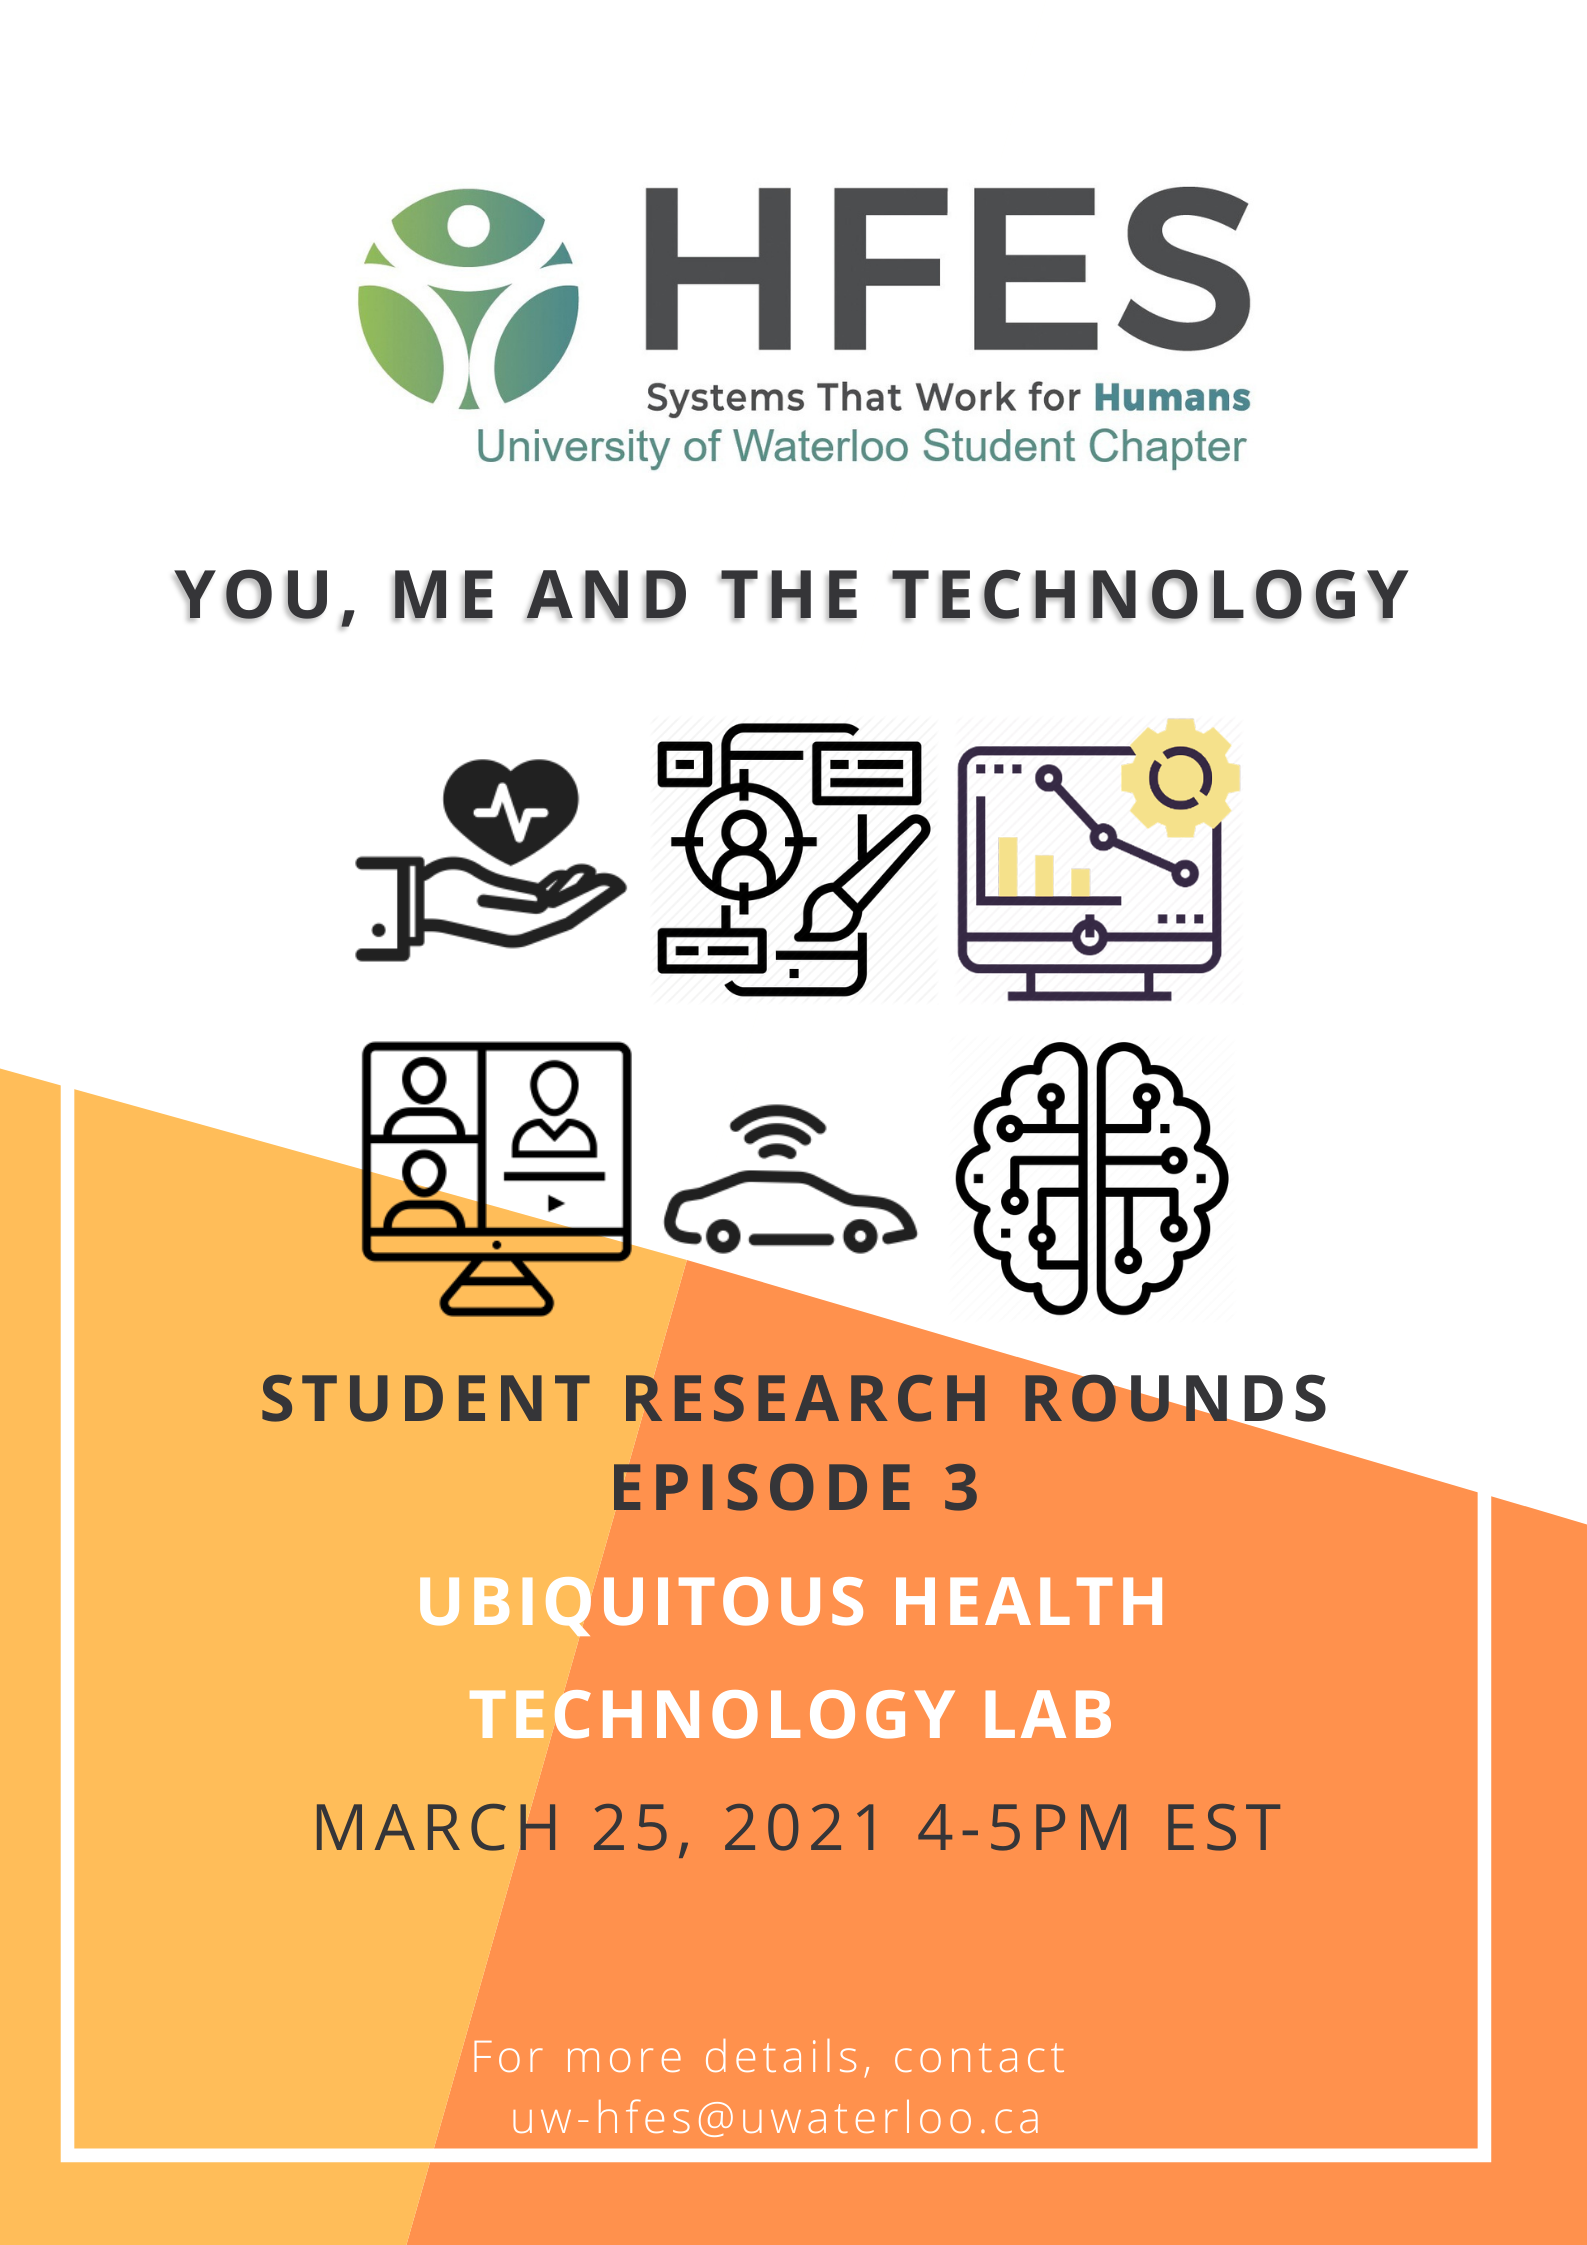 Student Research Rounds, Episode 3 featuring Ubiquitous Health Technology Lab